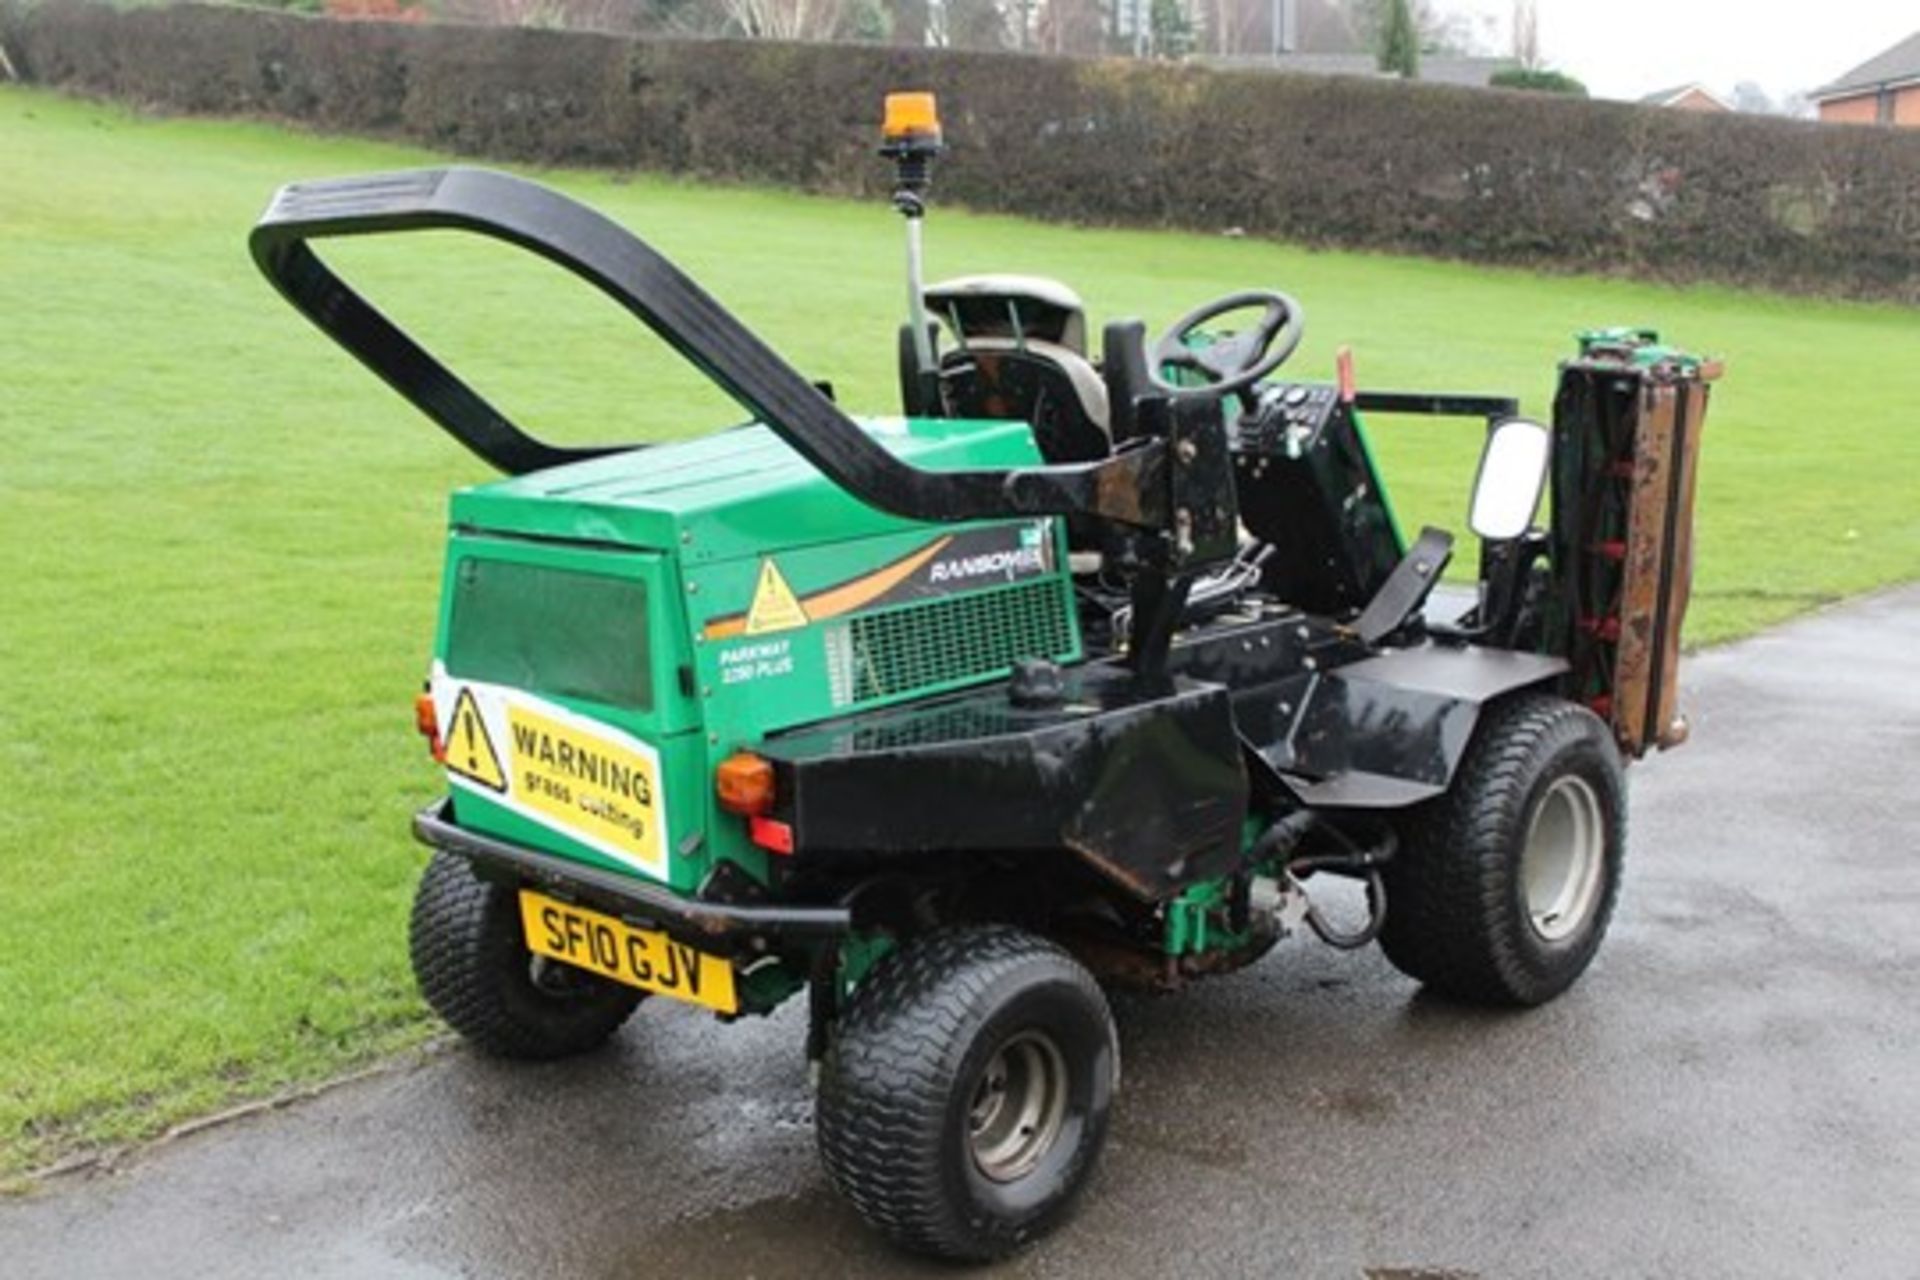 2010 Ransomes Parkway 2250 Plus Ride On Cylinder Mower - Image 7 of 8